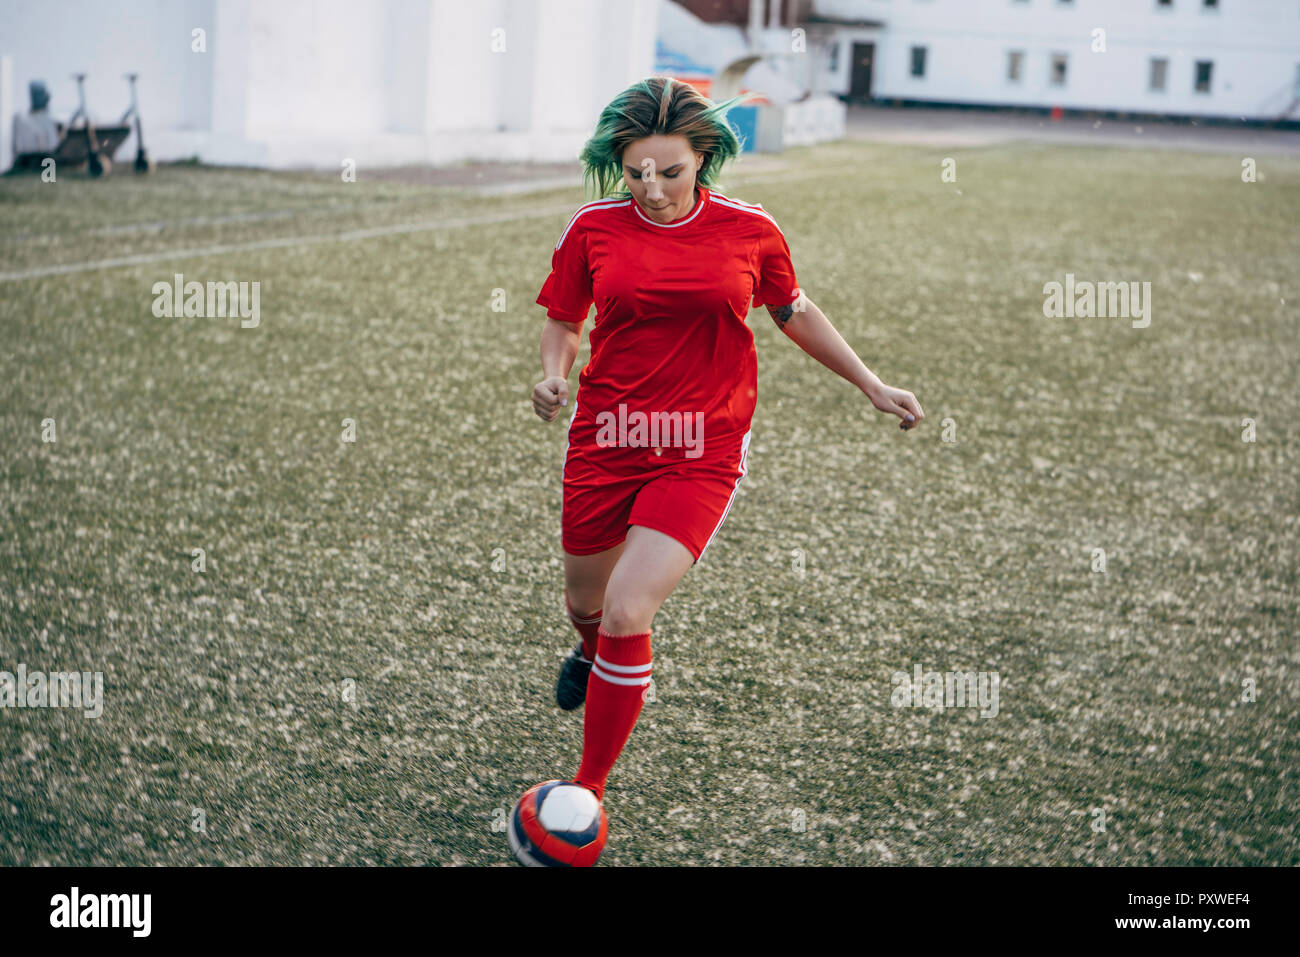 Young woman playing football on football ground running with the ball Stock Photo